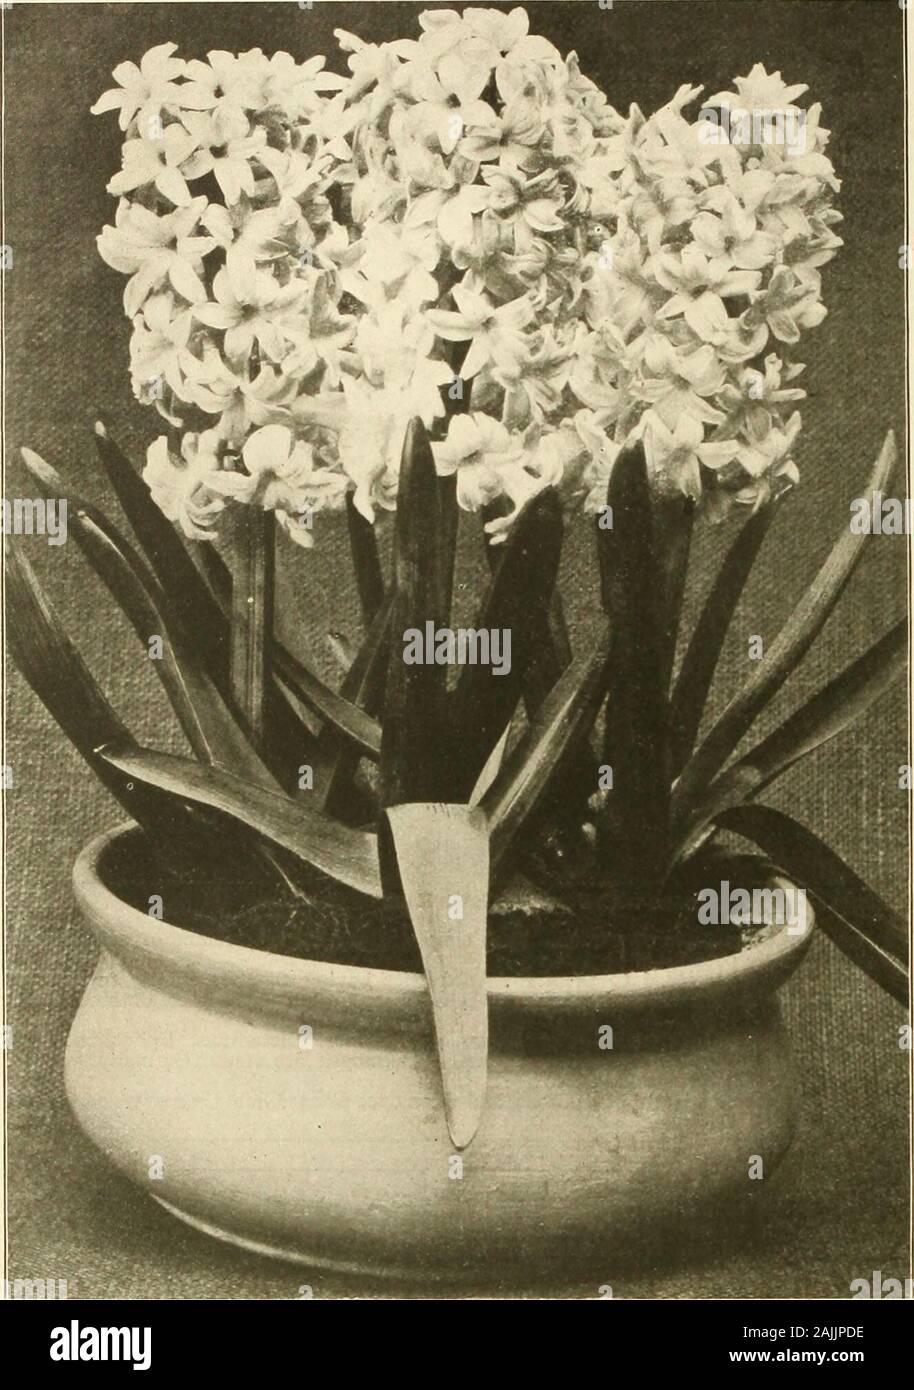 Farquhar's autumn catalogue : 1911 . English Woods Scilla Siberica. Blue Squill Single= Flowering Snowdrop ... Single Snowdrop. Elwes Giant Trillium Erectum Doz., $ .75 Trillium Erythrocarpum .... Doz.. Si.00Trillium Qrandiflorum. Giant American Wood LilyWinter Aconite. Golden Yellow, earliest spring flower .00005°2500 7550•25.00 ?SO . 00 25, 00.00.00 *25.00 12 . 008.5025.0022 . 0010.00 10.008.50 15 .0012 .00 10 . 0014 .00 S.oo0. 00 six of a Kind Sold at Dozen Rates; 25 at 100 Rate*; 250 at 1,000 Rate*. R. &- J. FAKQUHAR €r CO., BOSTON. CULTURE OF HYACINTHS.. Hyacinths Rowing In Fibre.The sing Stock Photo